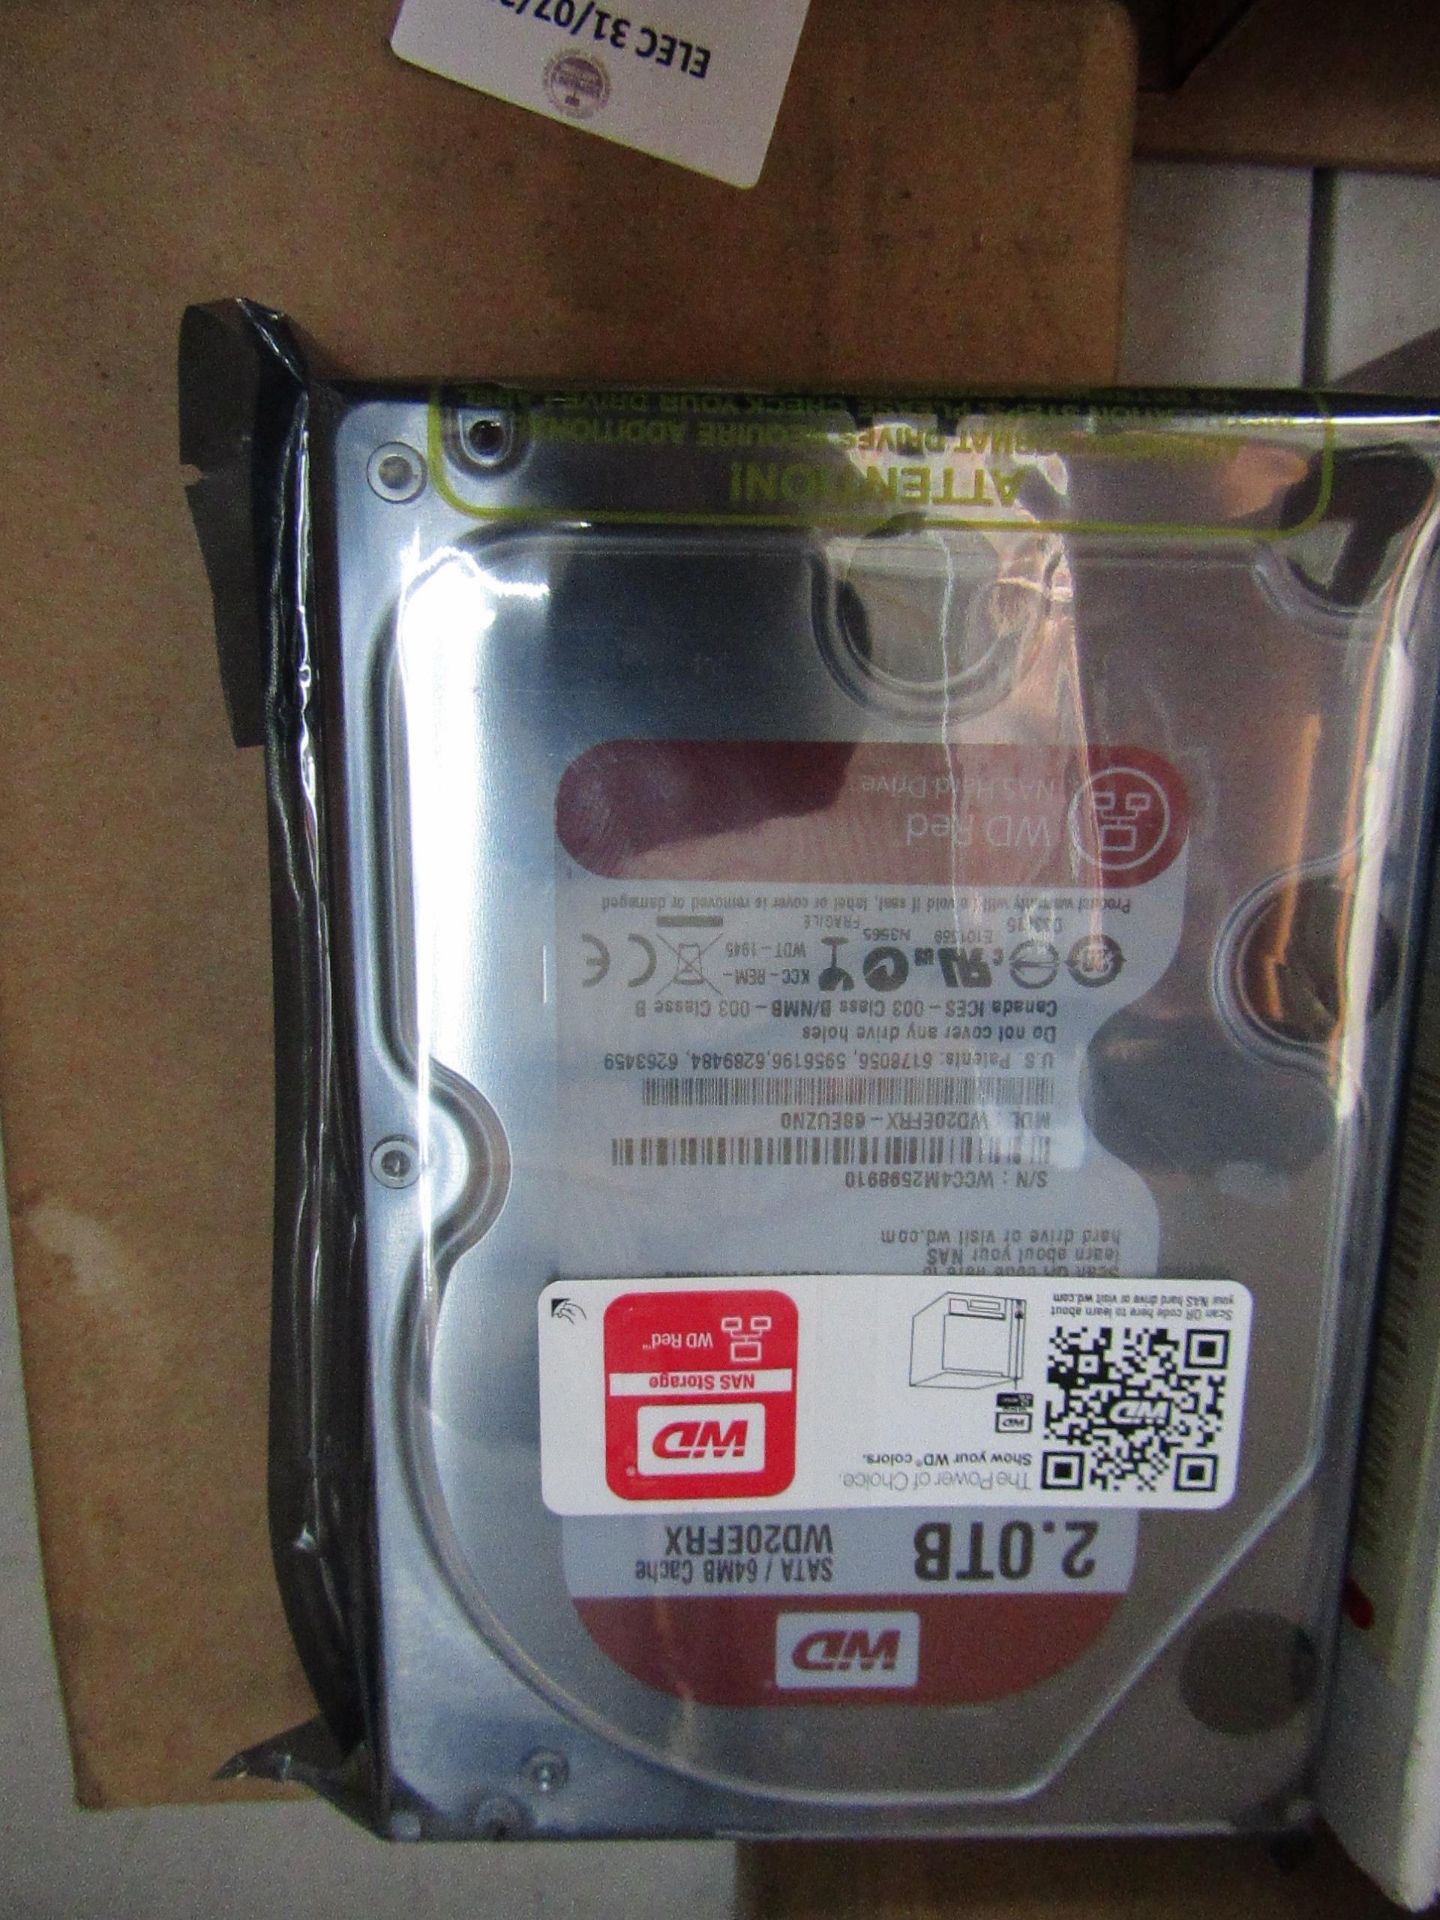 Western Digital WD20EFRX 2Tb hard drive, Unchecked